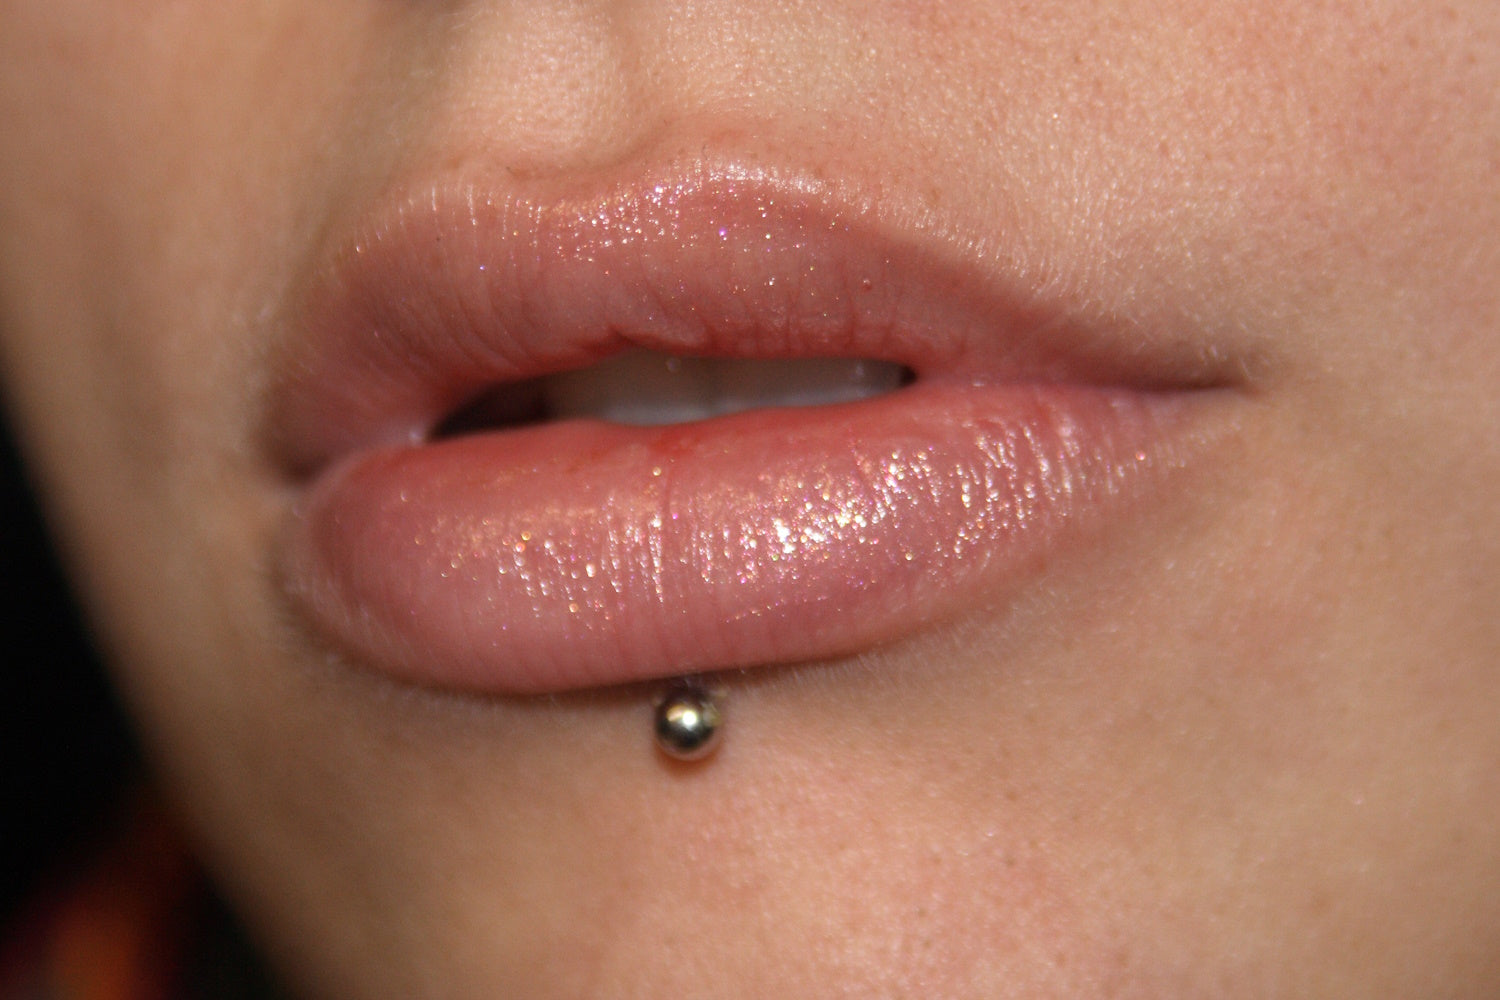 A close up of a female with her lip pierced.